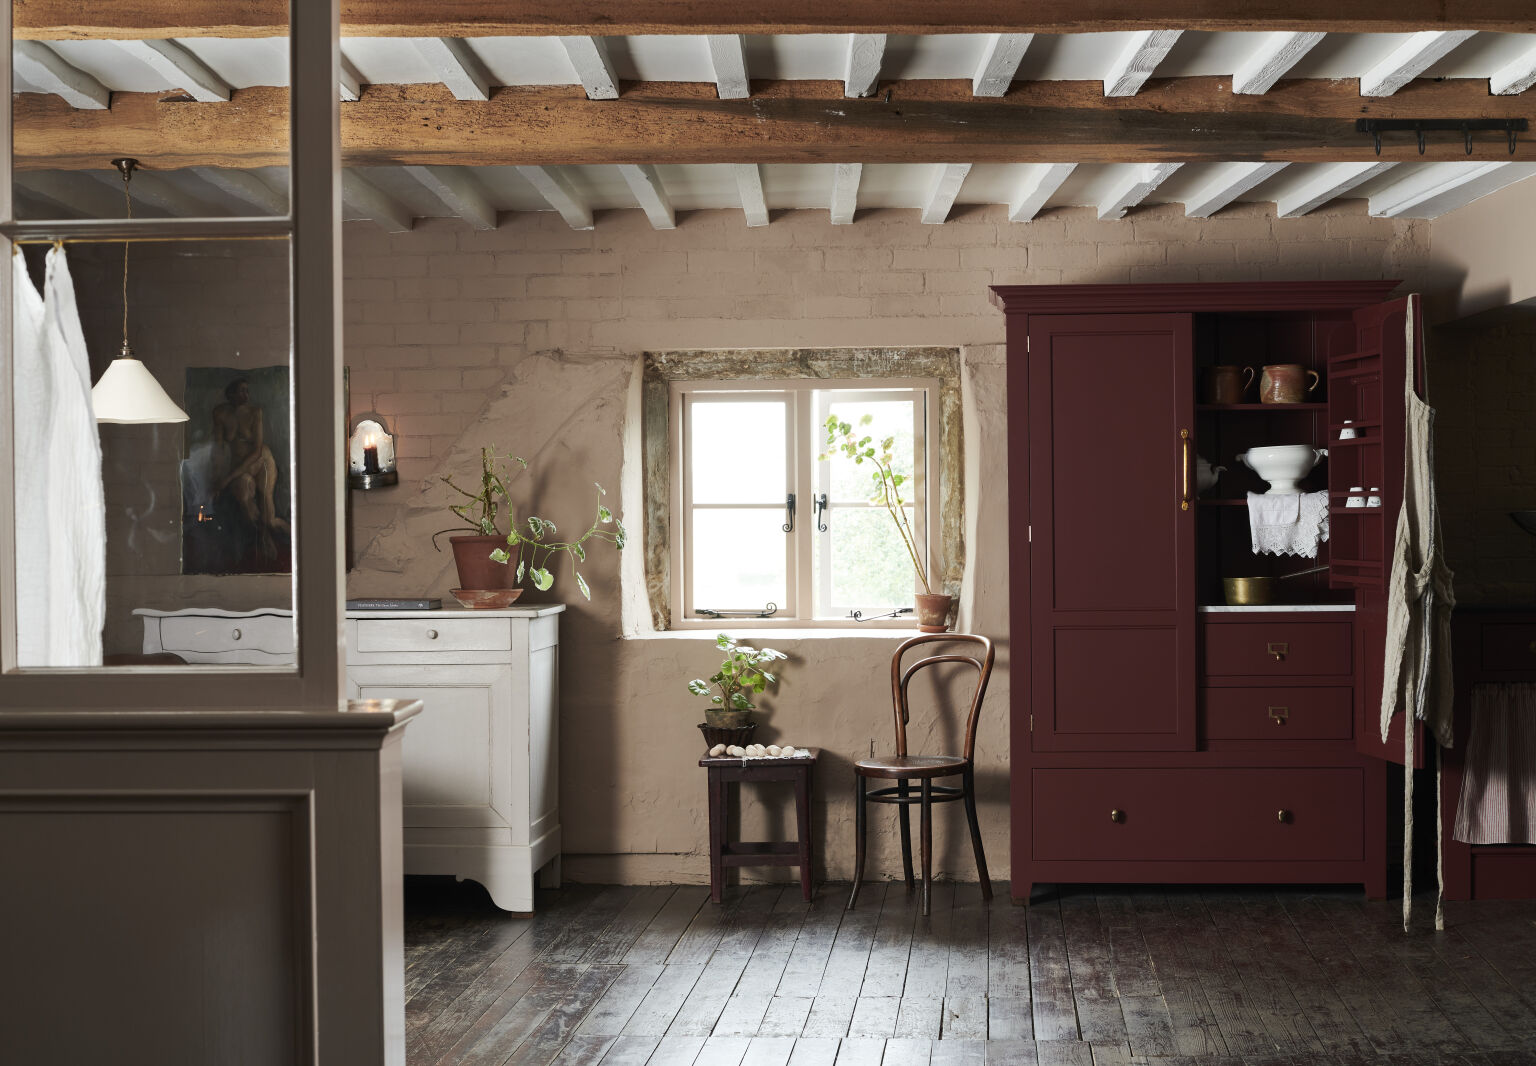 Kitchen of the Week Burgundy Meets Blush in the English Countryside portrait 3